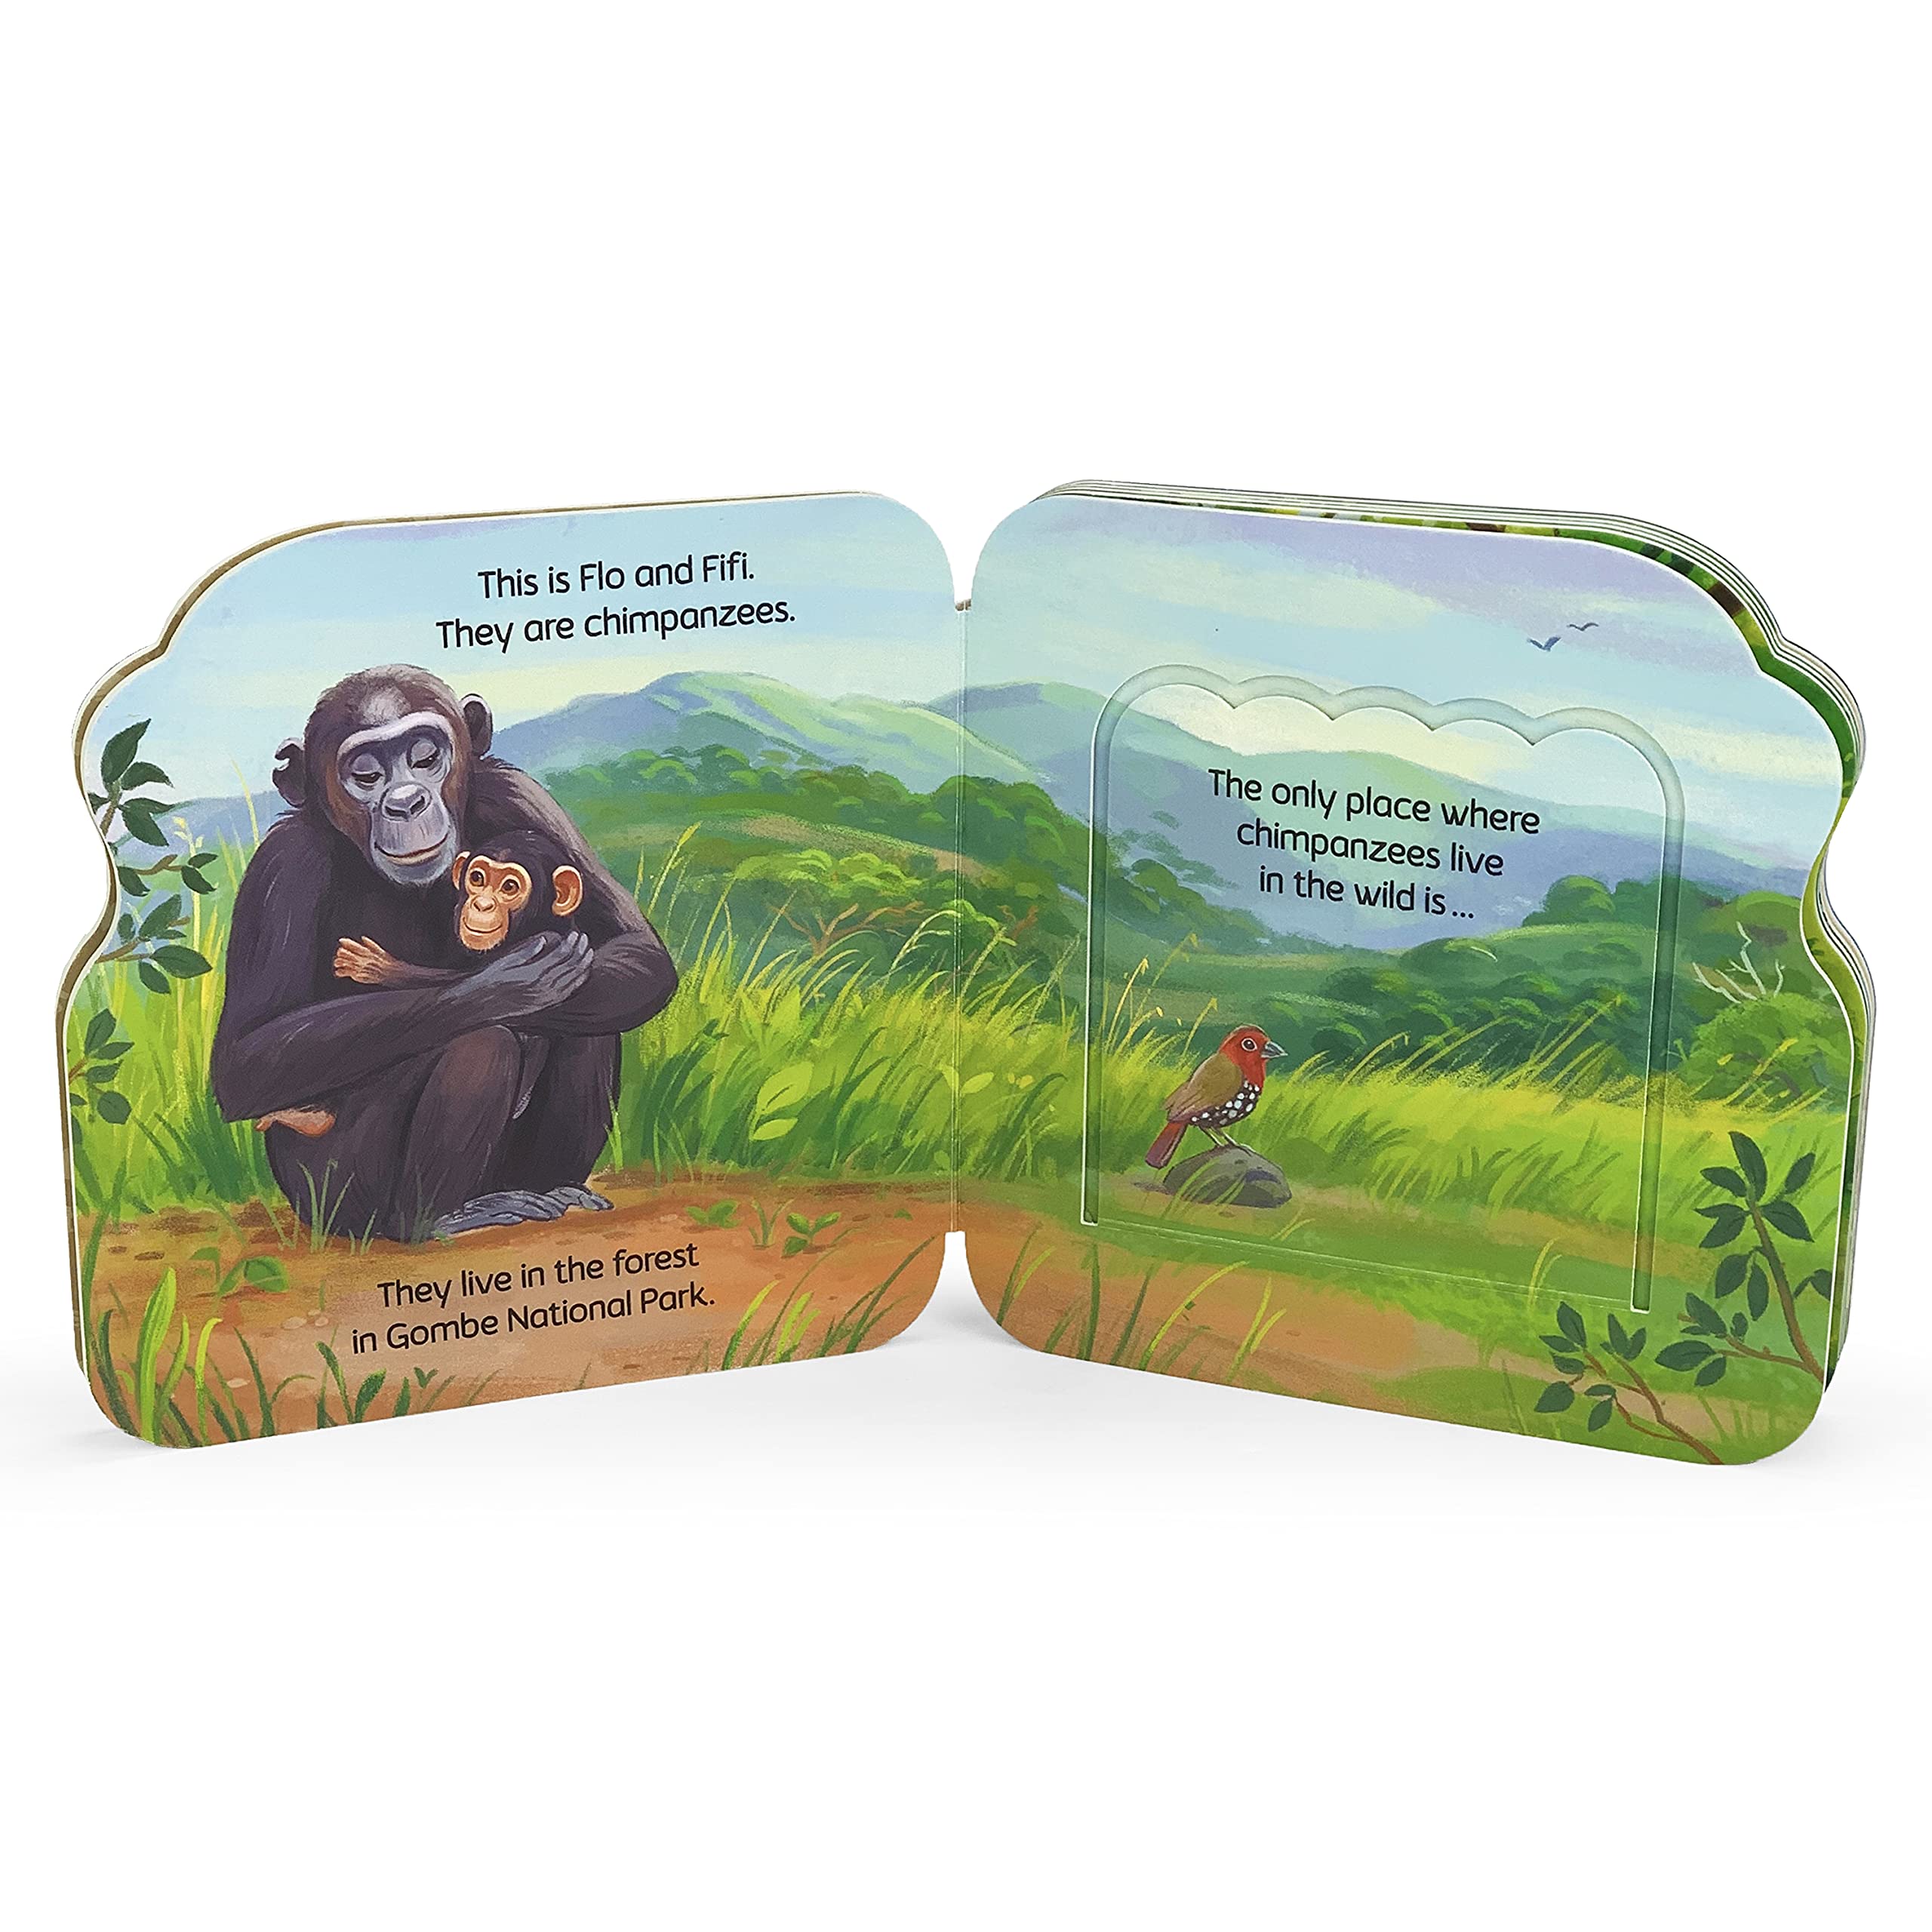 Jane Goodall Chimpanzees Book and Plush Set - Children's Lift-a-Flap Board Book for Babies and Toddlers including Stuffed Chimp, Ages 2-5